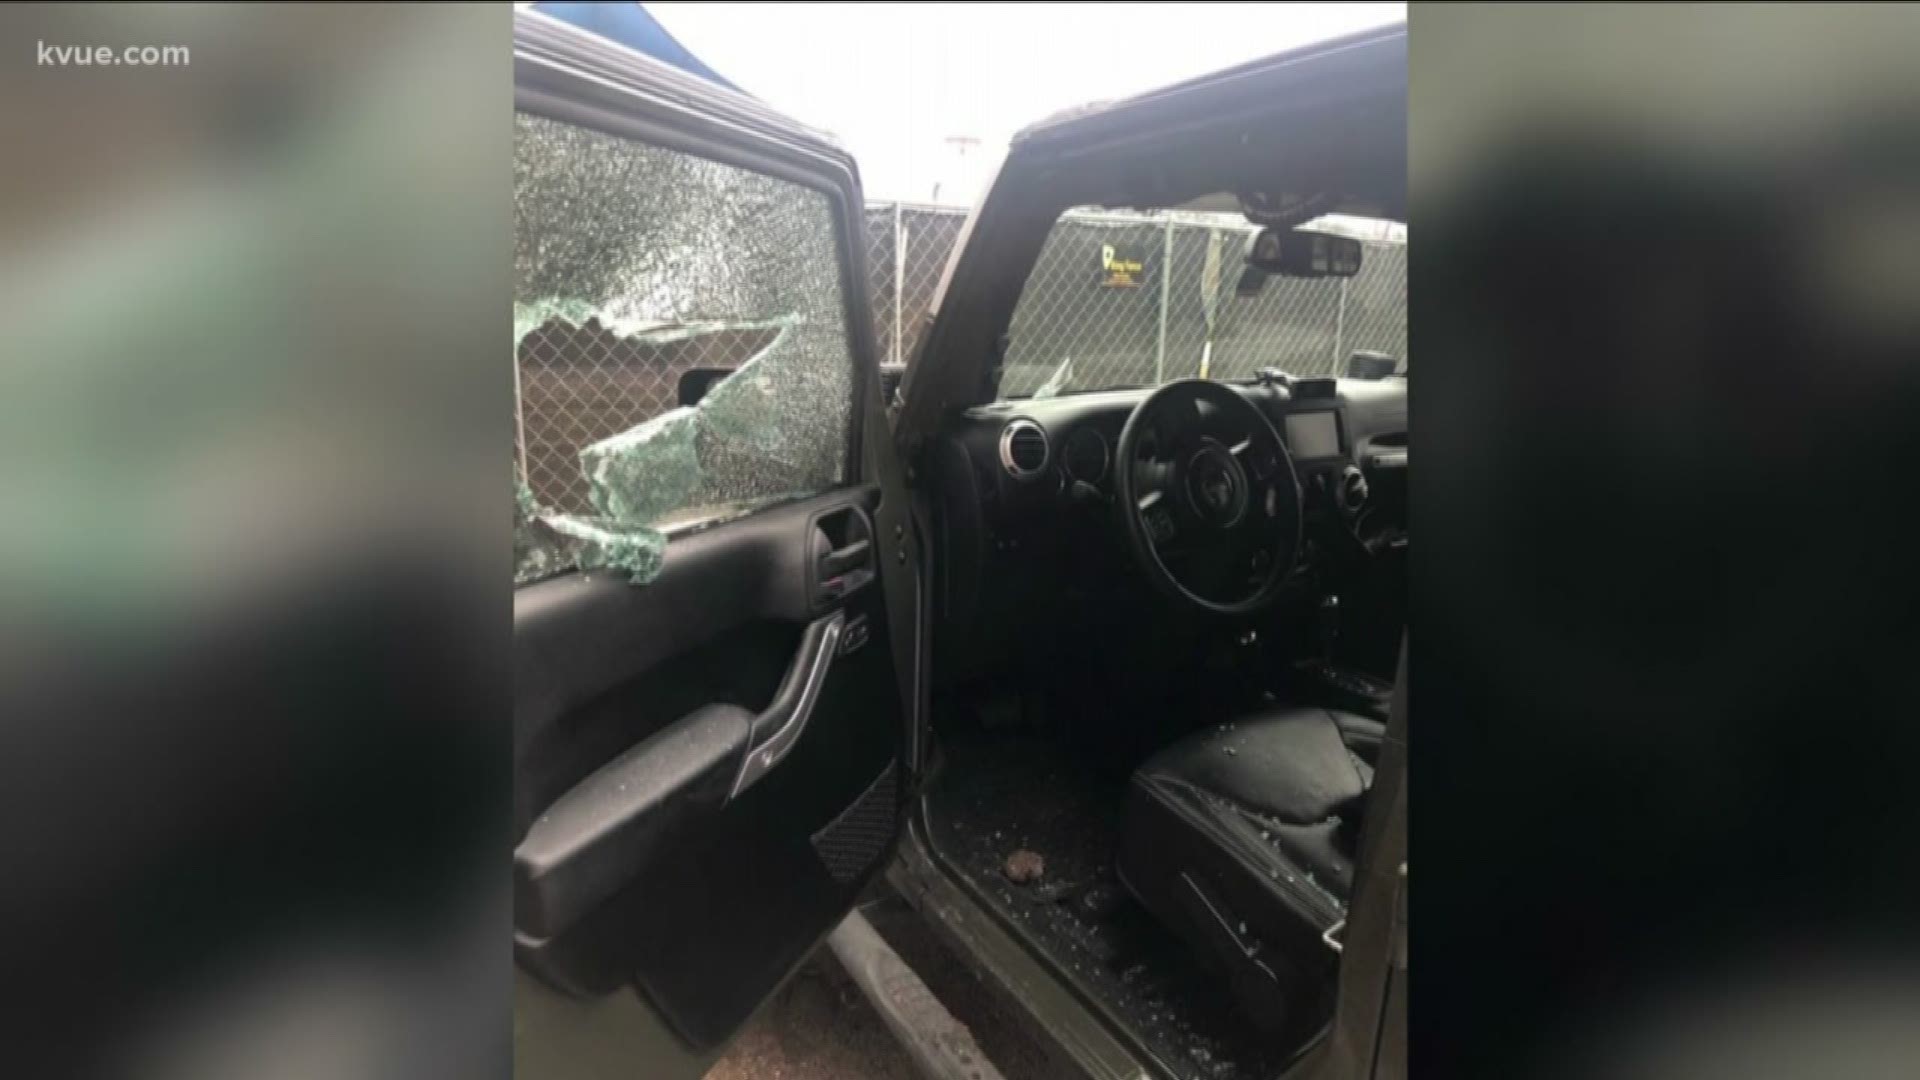 Texas Land Commissioner George P. Bush is blaming the homeless for smashing up his vehicle Tuesday morning.